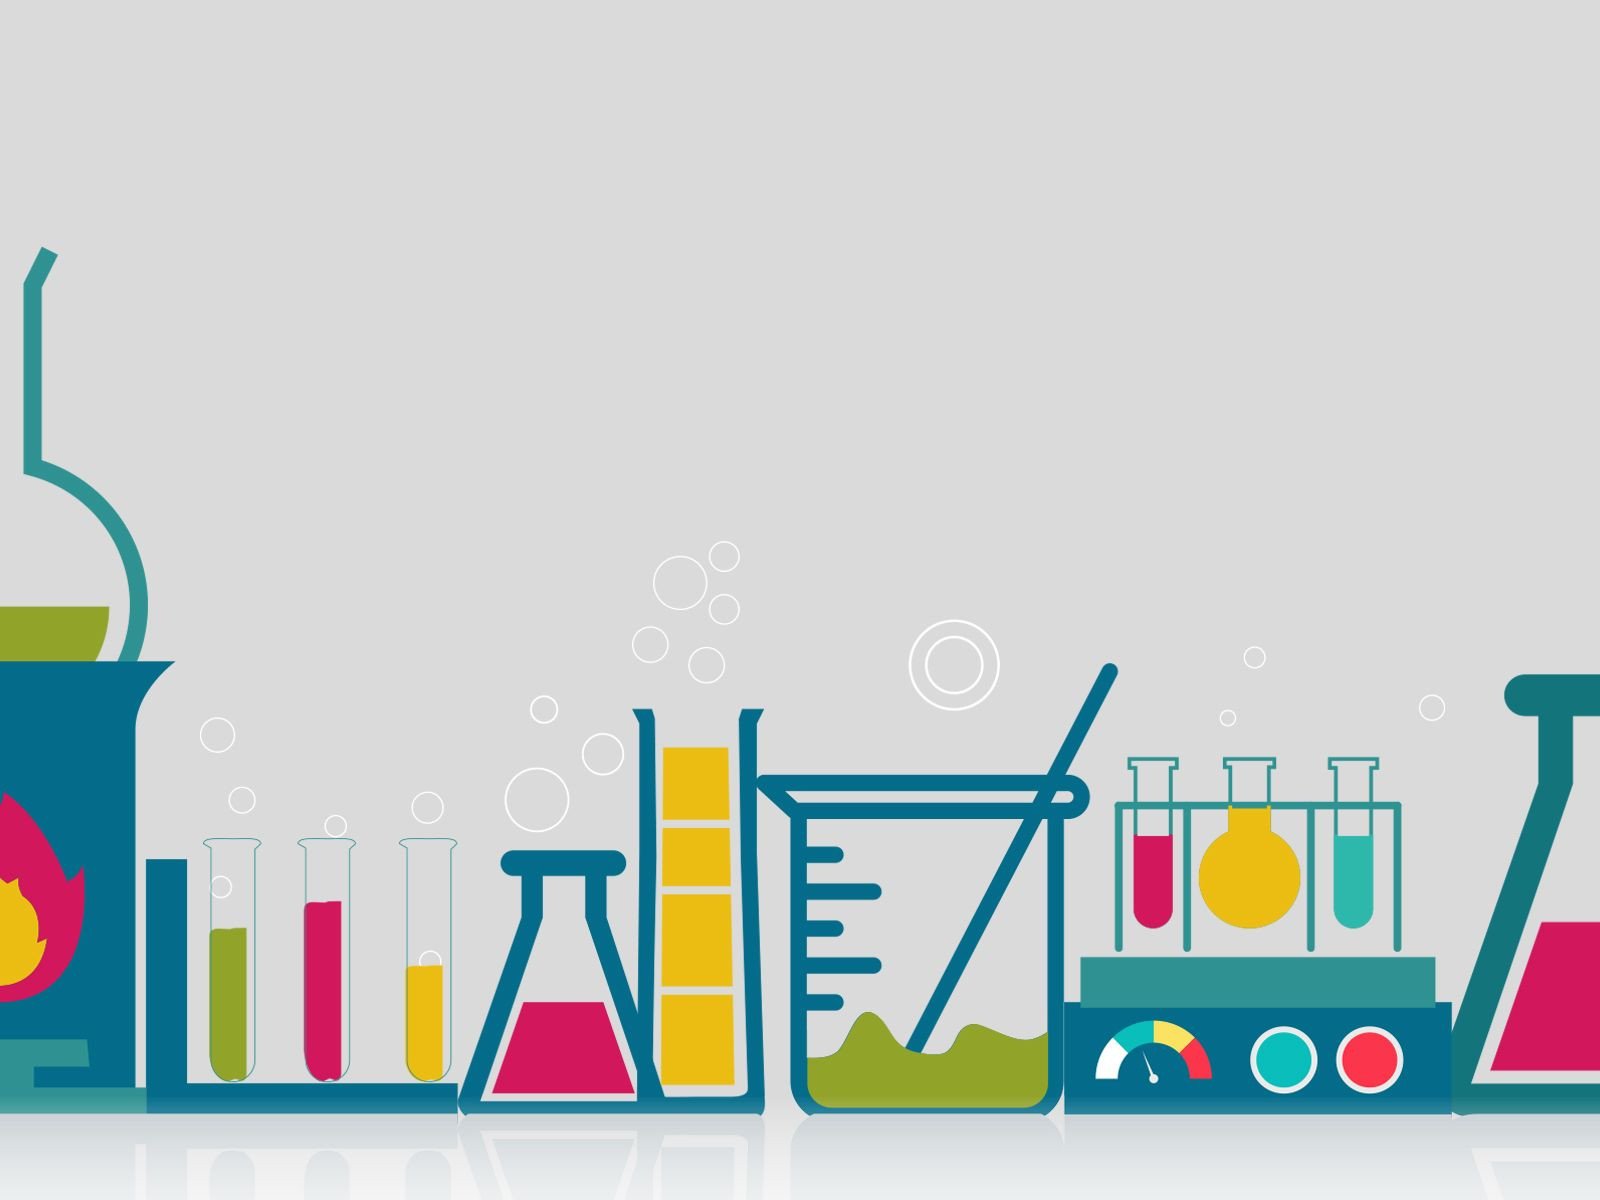 Free Science Powerpoint Templates This Chemistry Powerpoint Background is A Simple Design